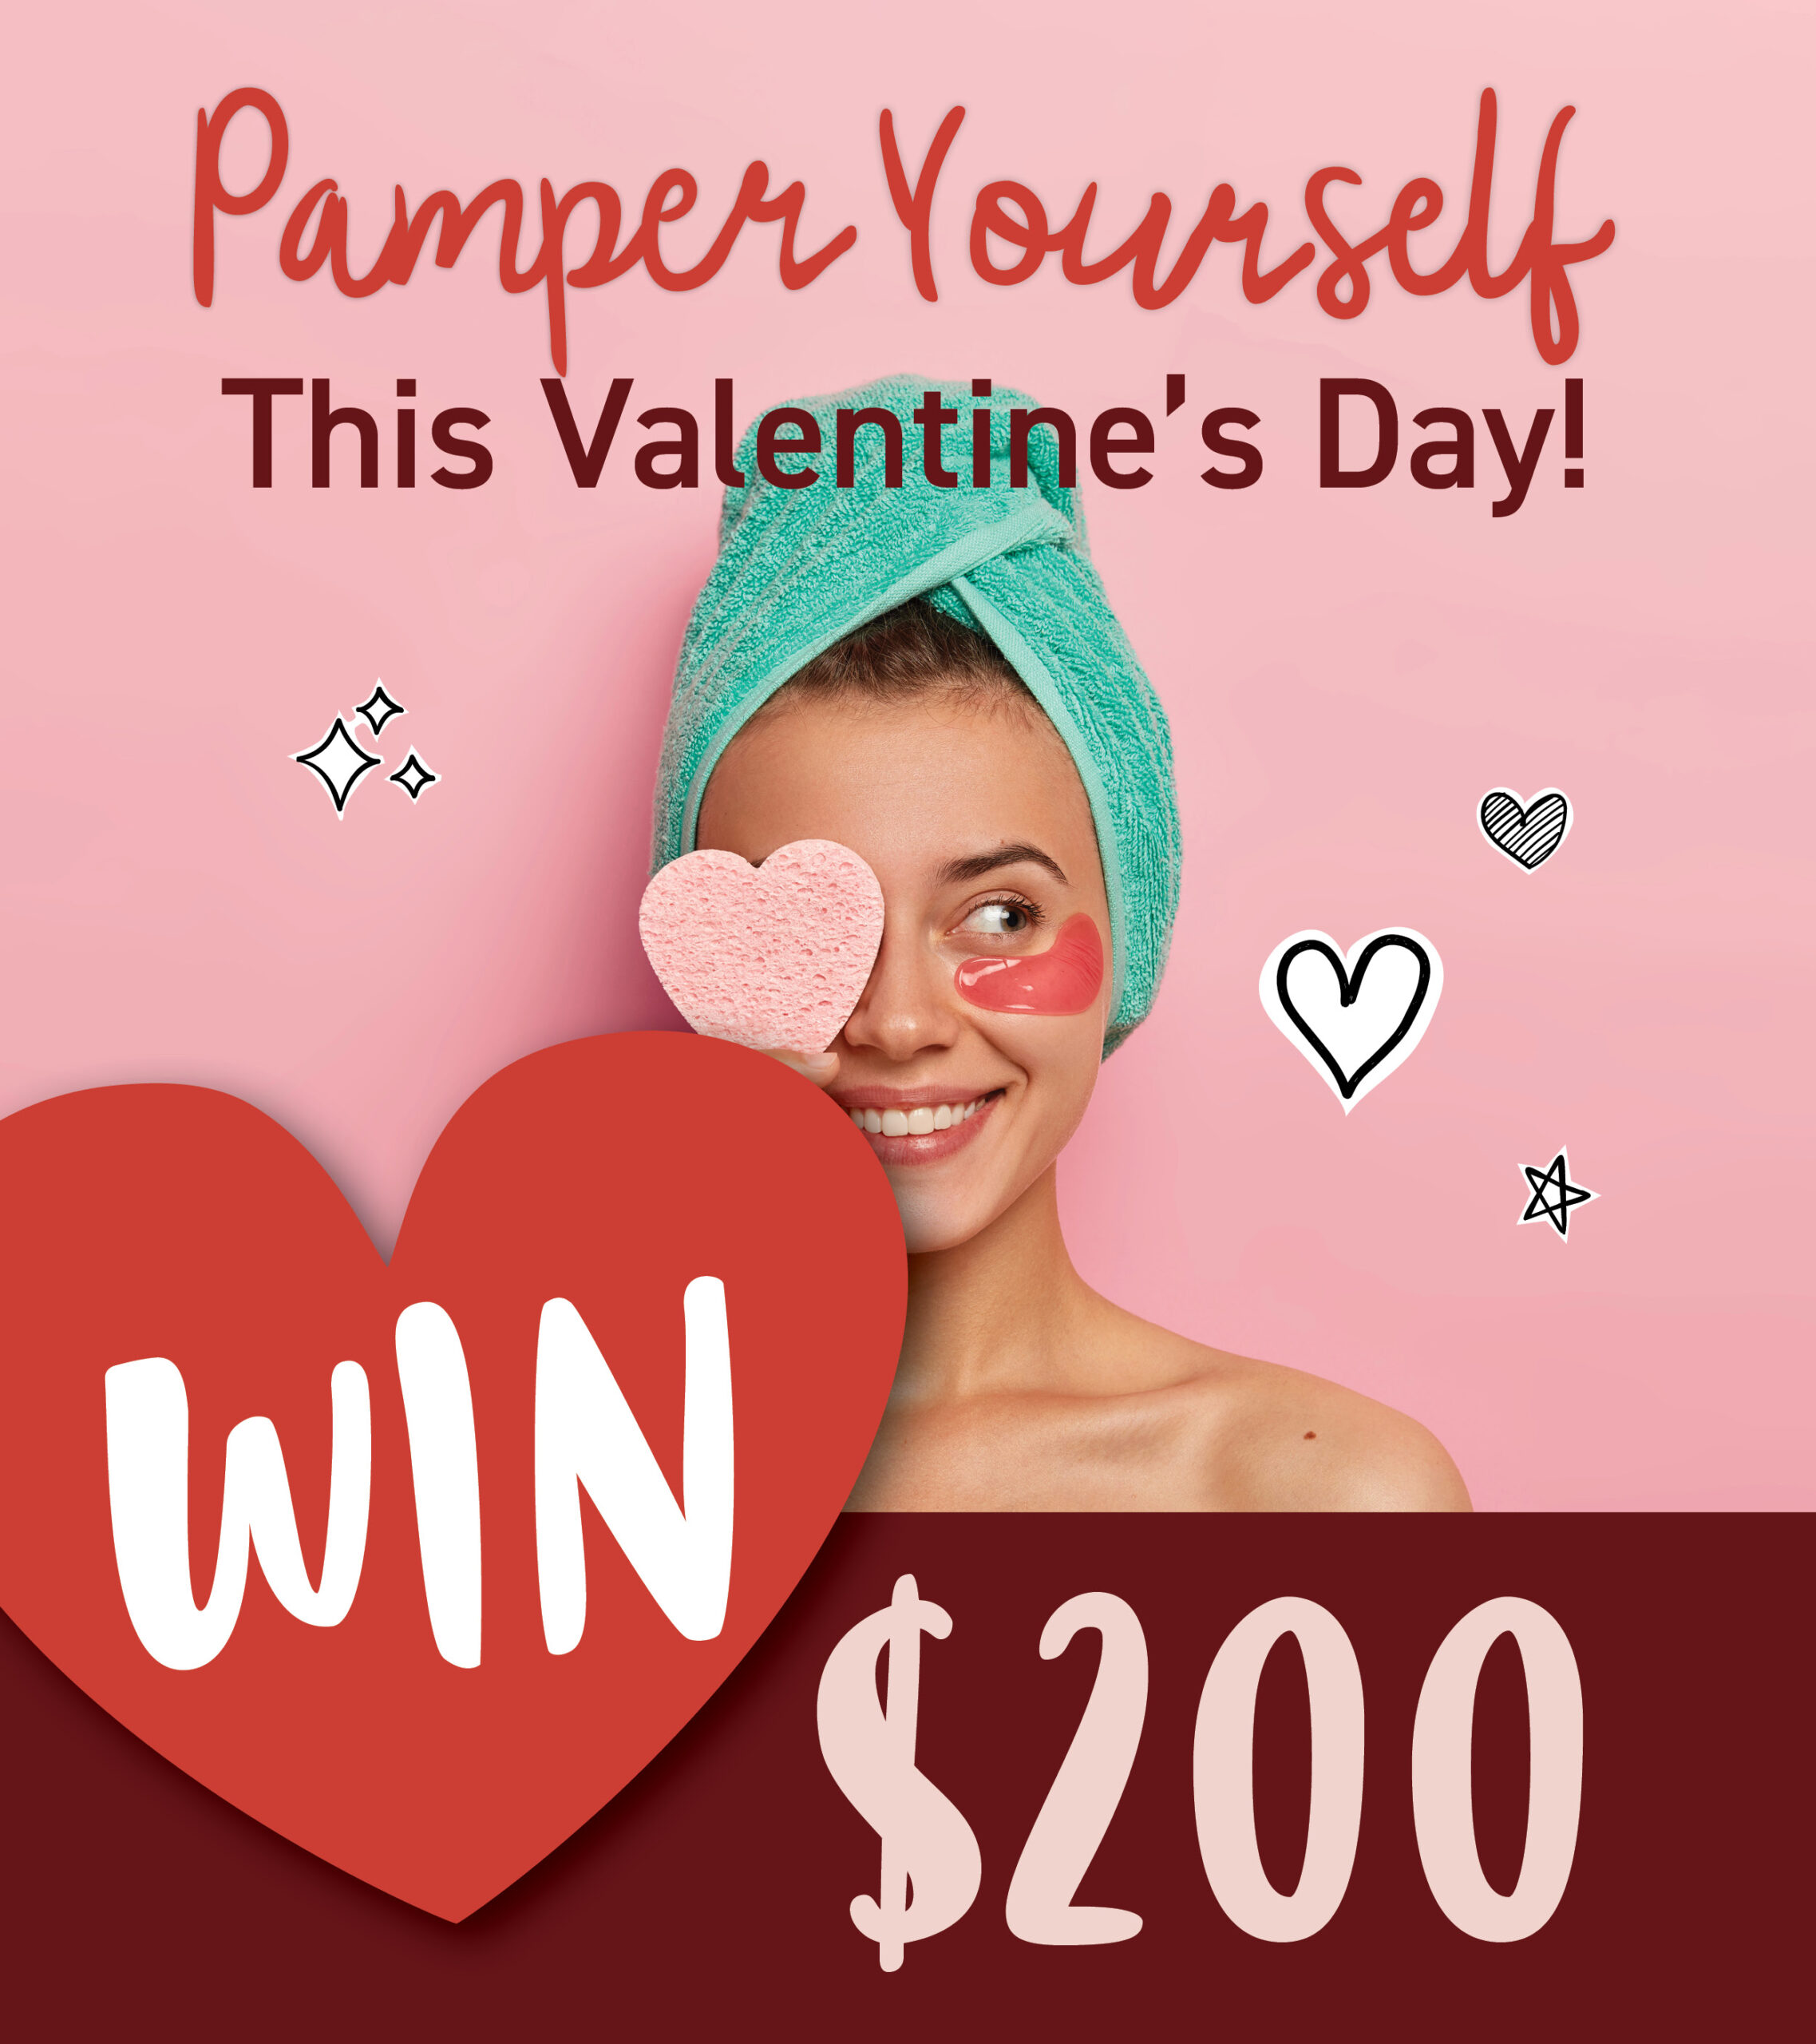 Pamper Yourself With 200 This Valentines Day